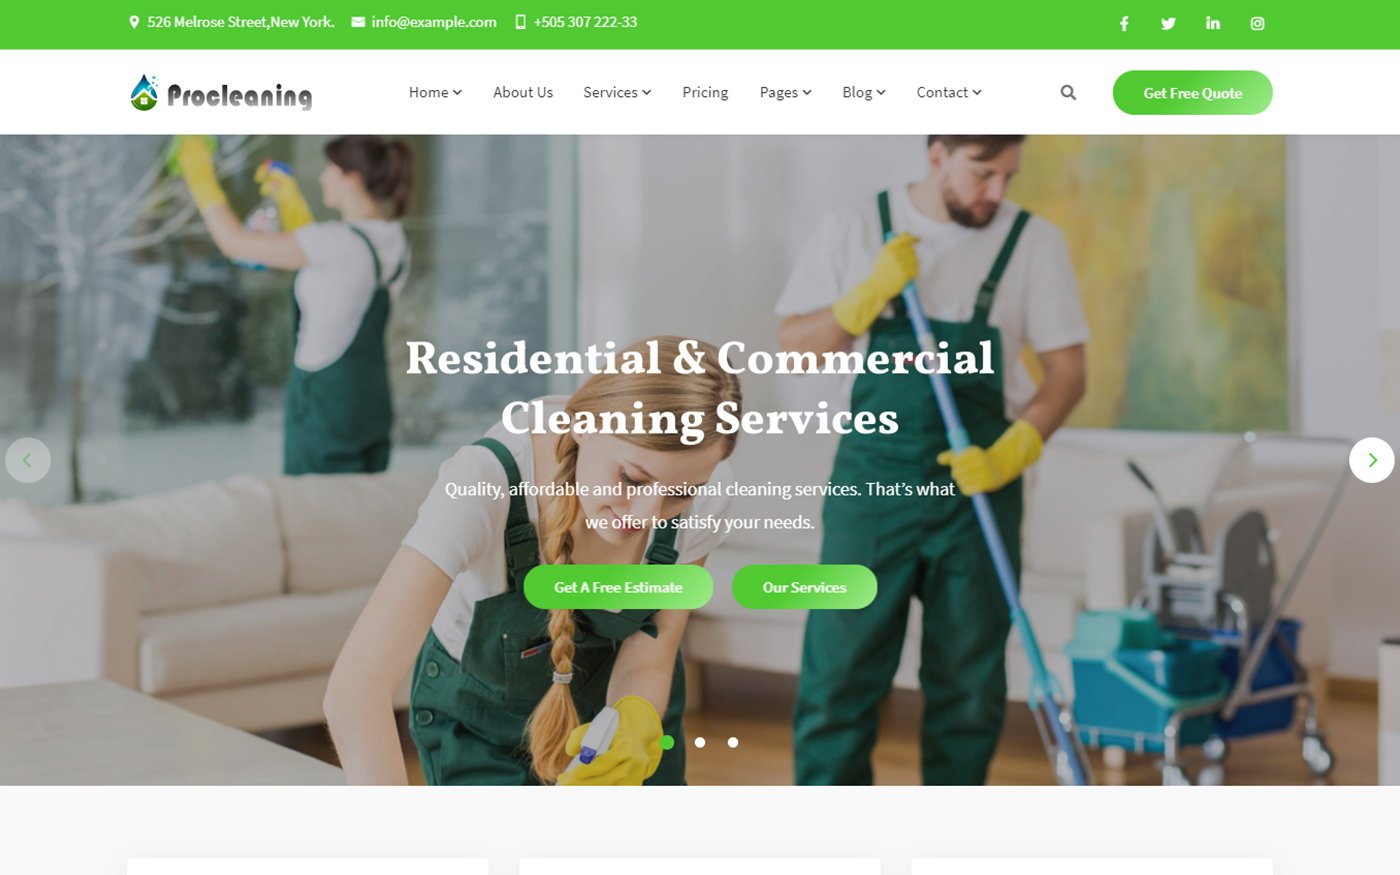 ProCleaning - Cleaning Service & Dry Laundry Website Template